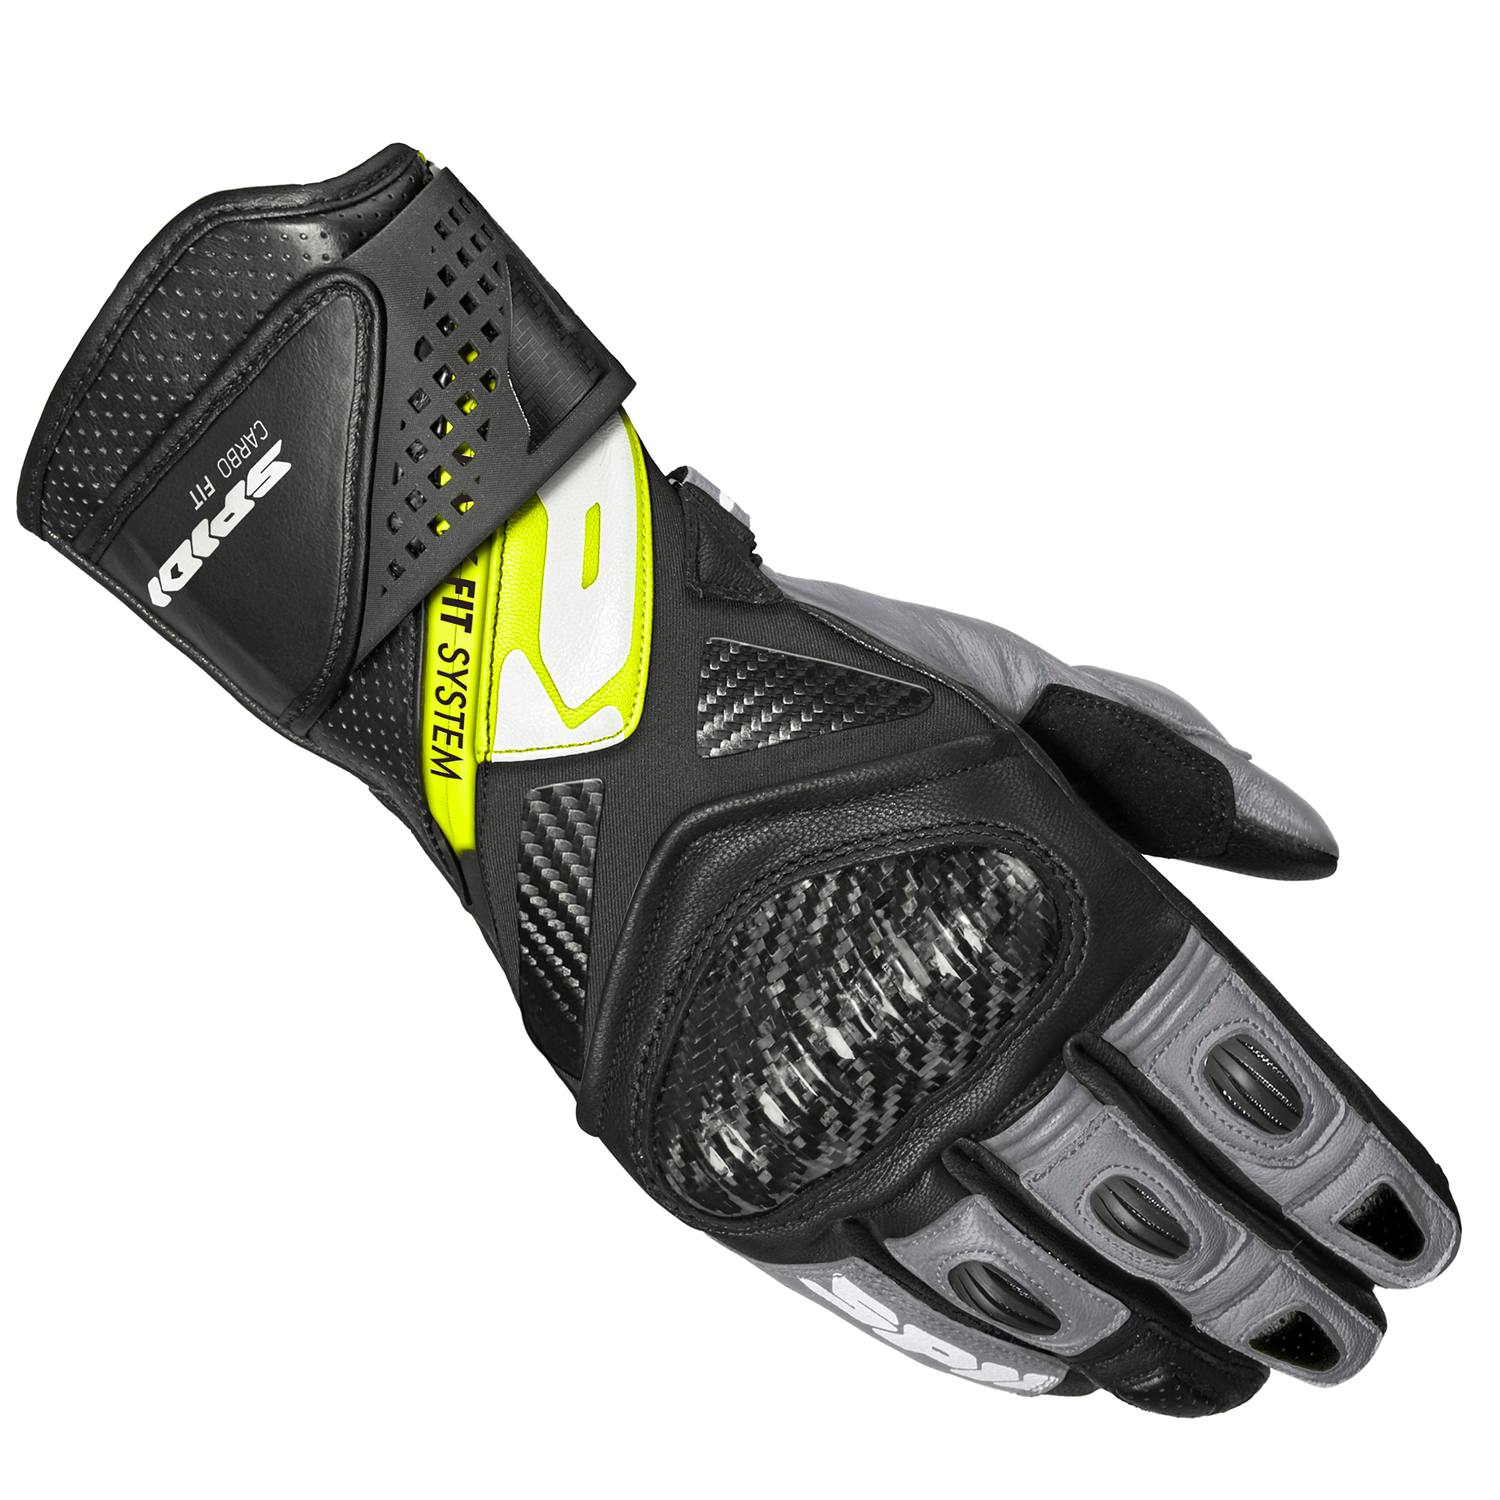 Image of Spidi Carbo Fit Gloves Black Fluorescente Yellow Size 2XL ID 8030161481570